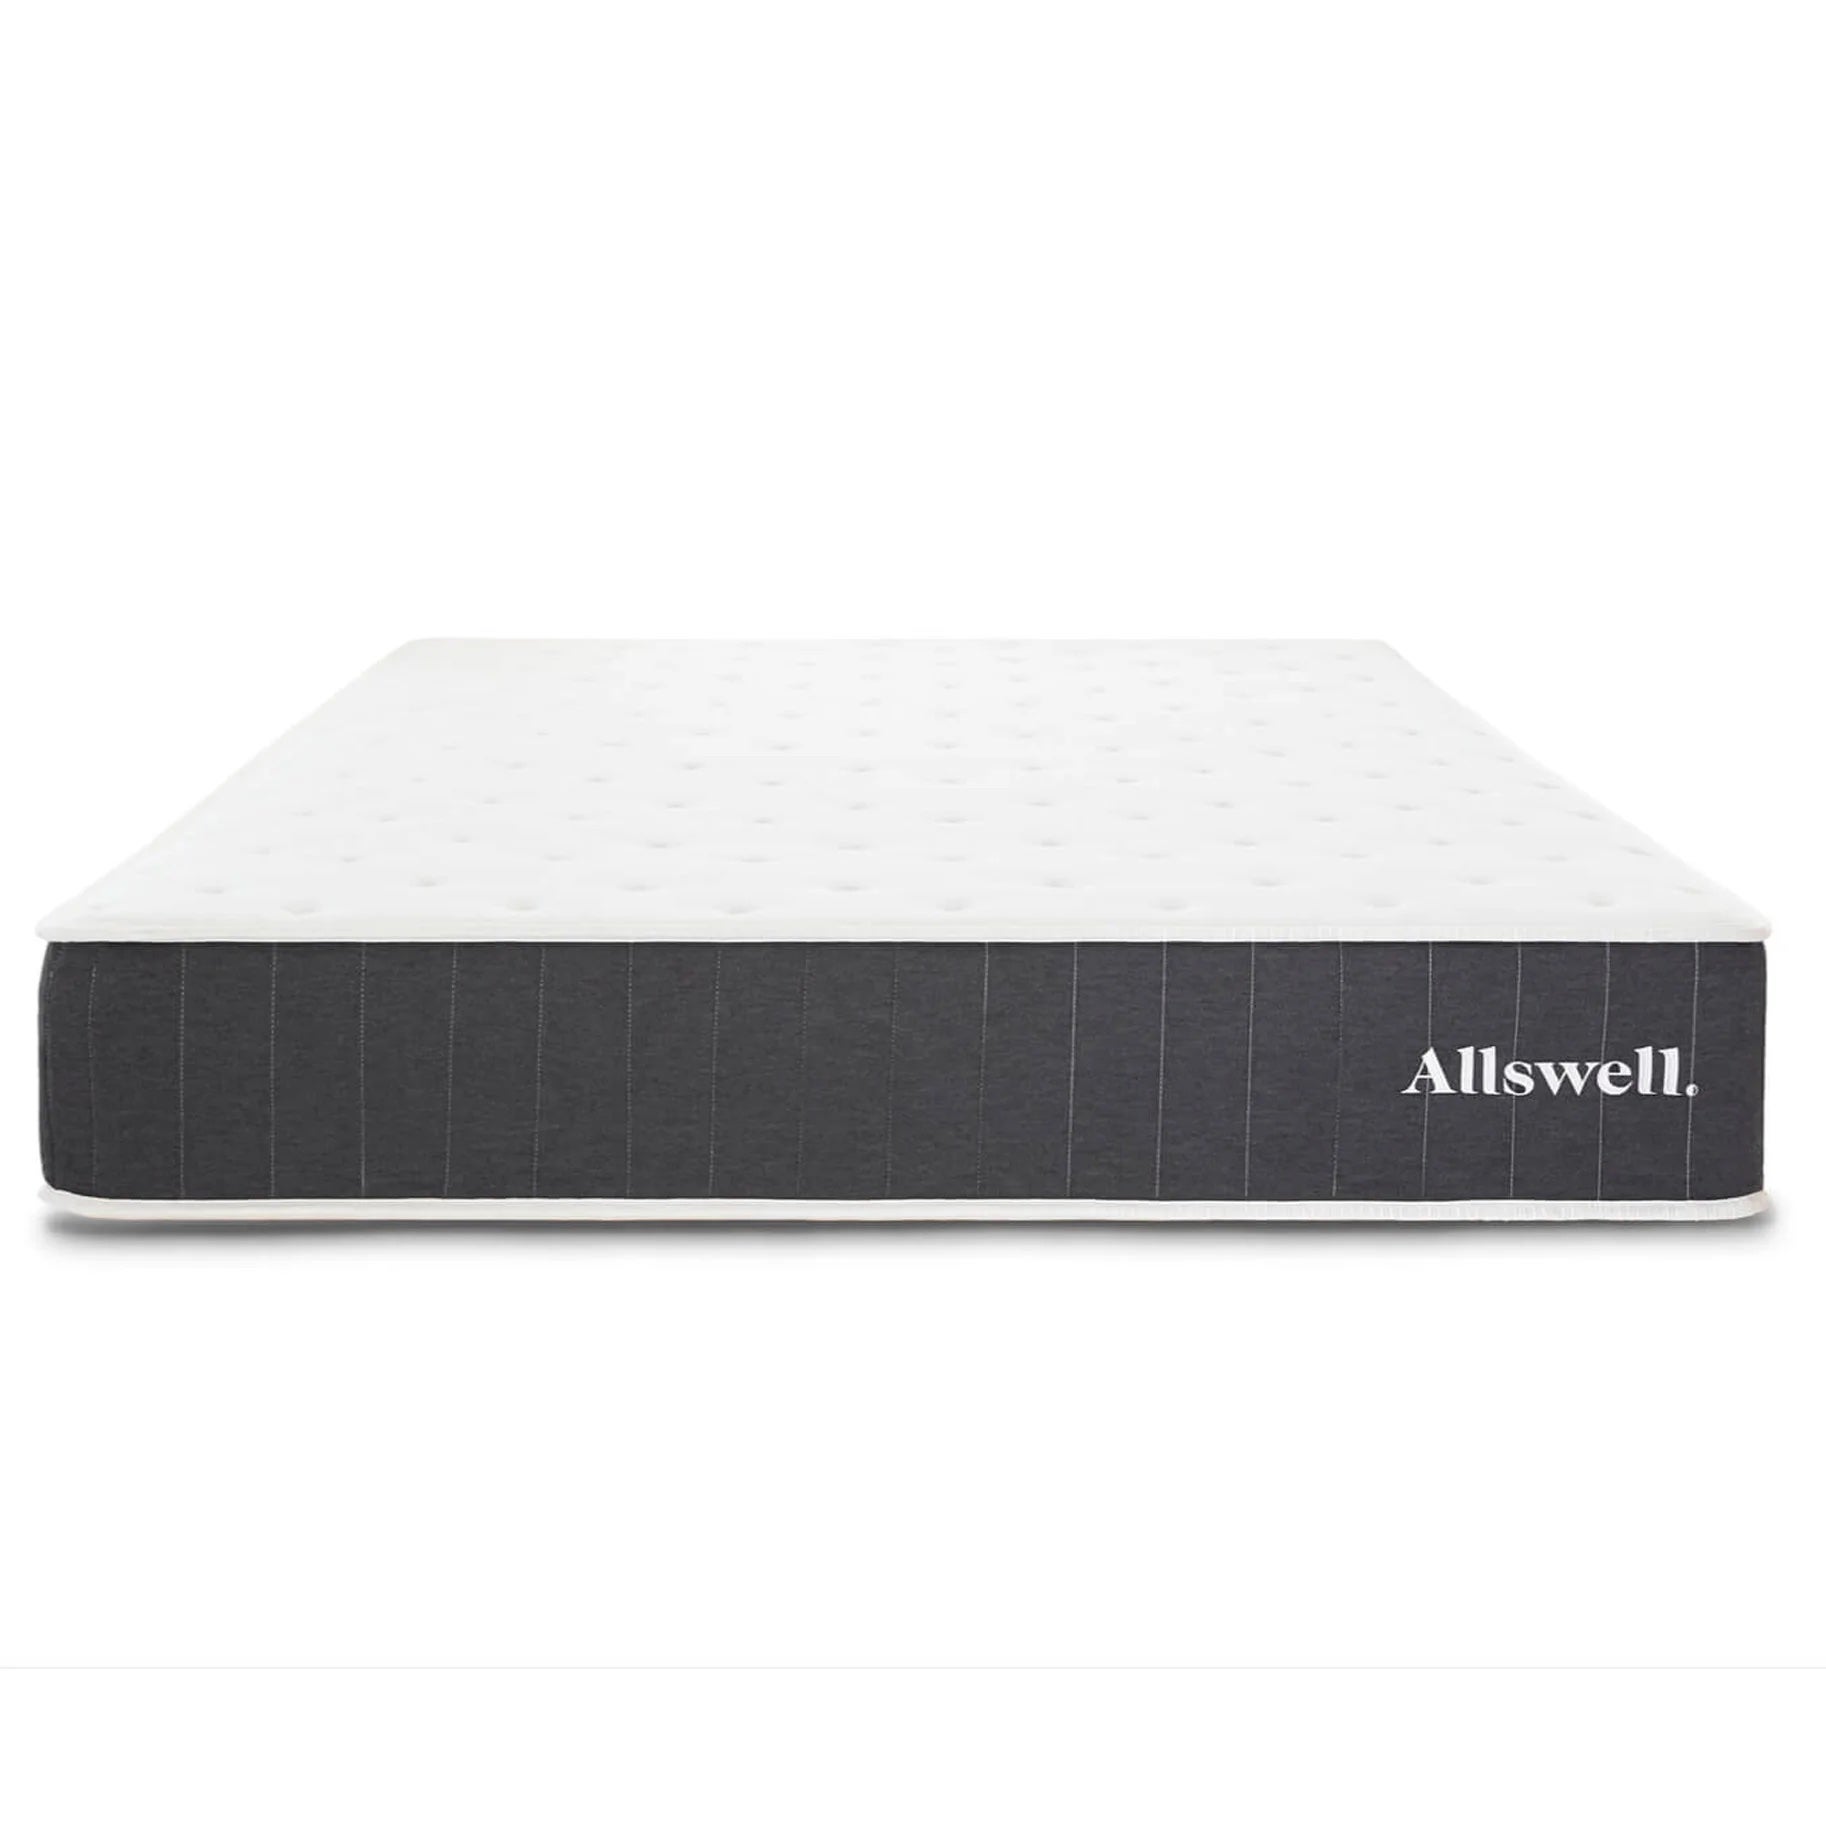 Allswell Home Affordable Mattress